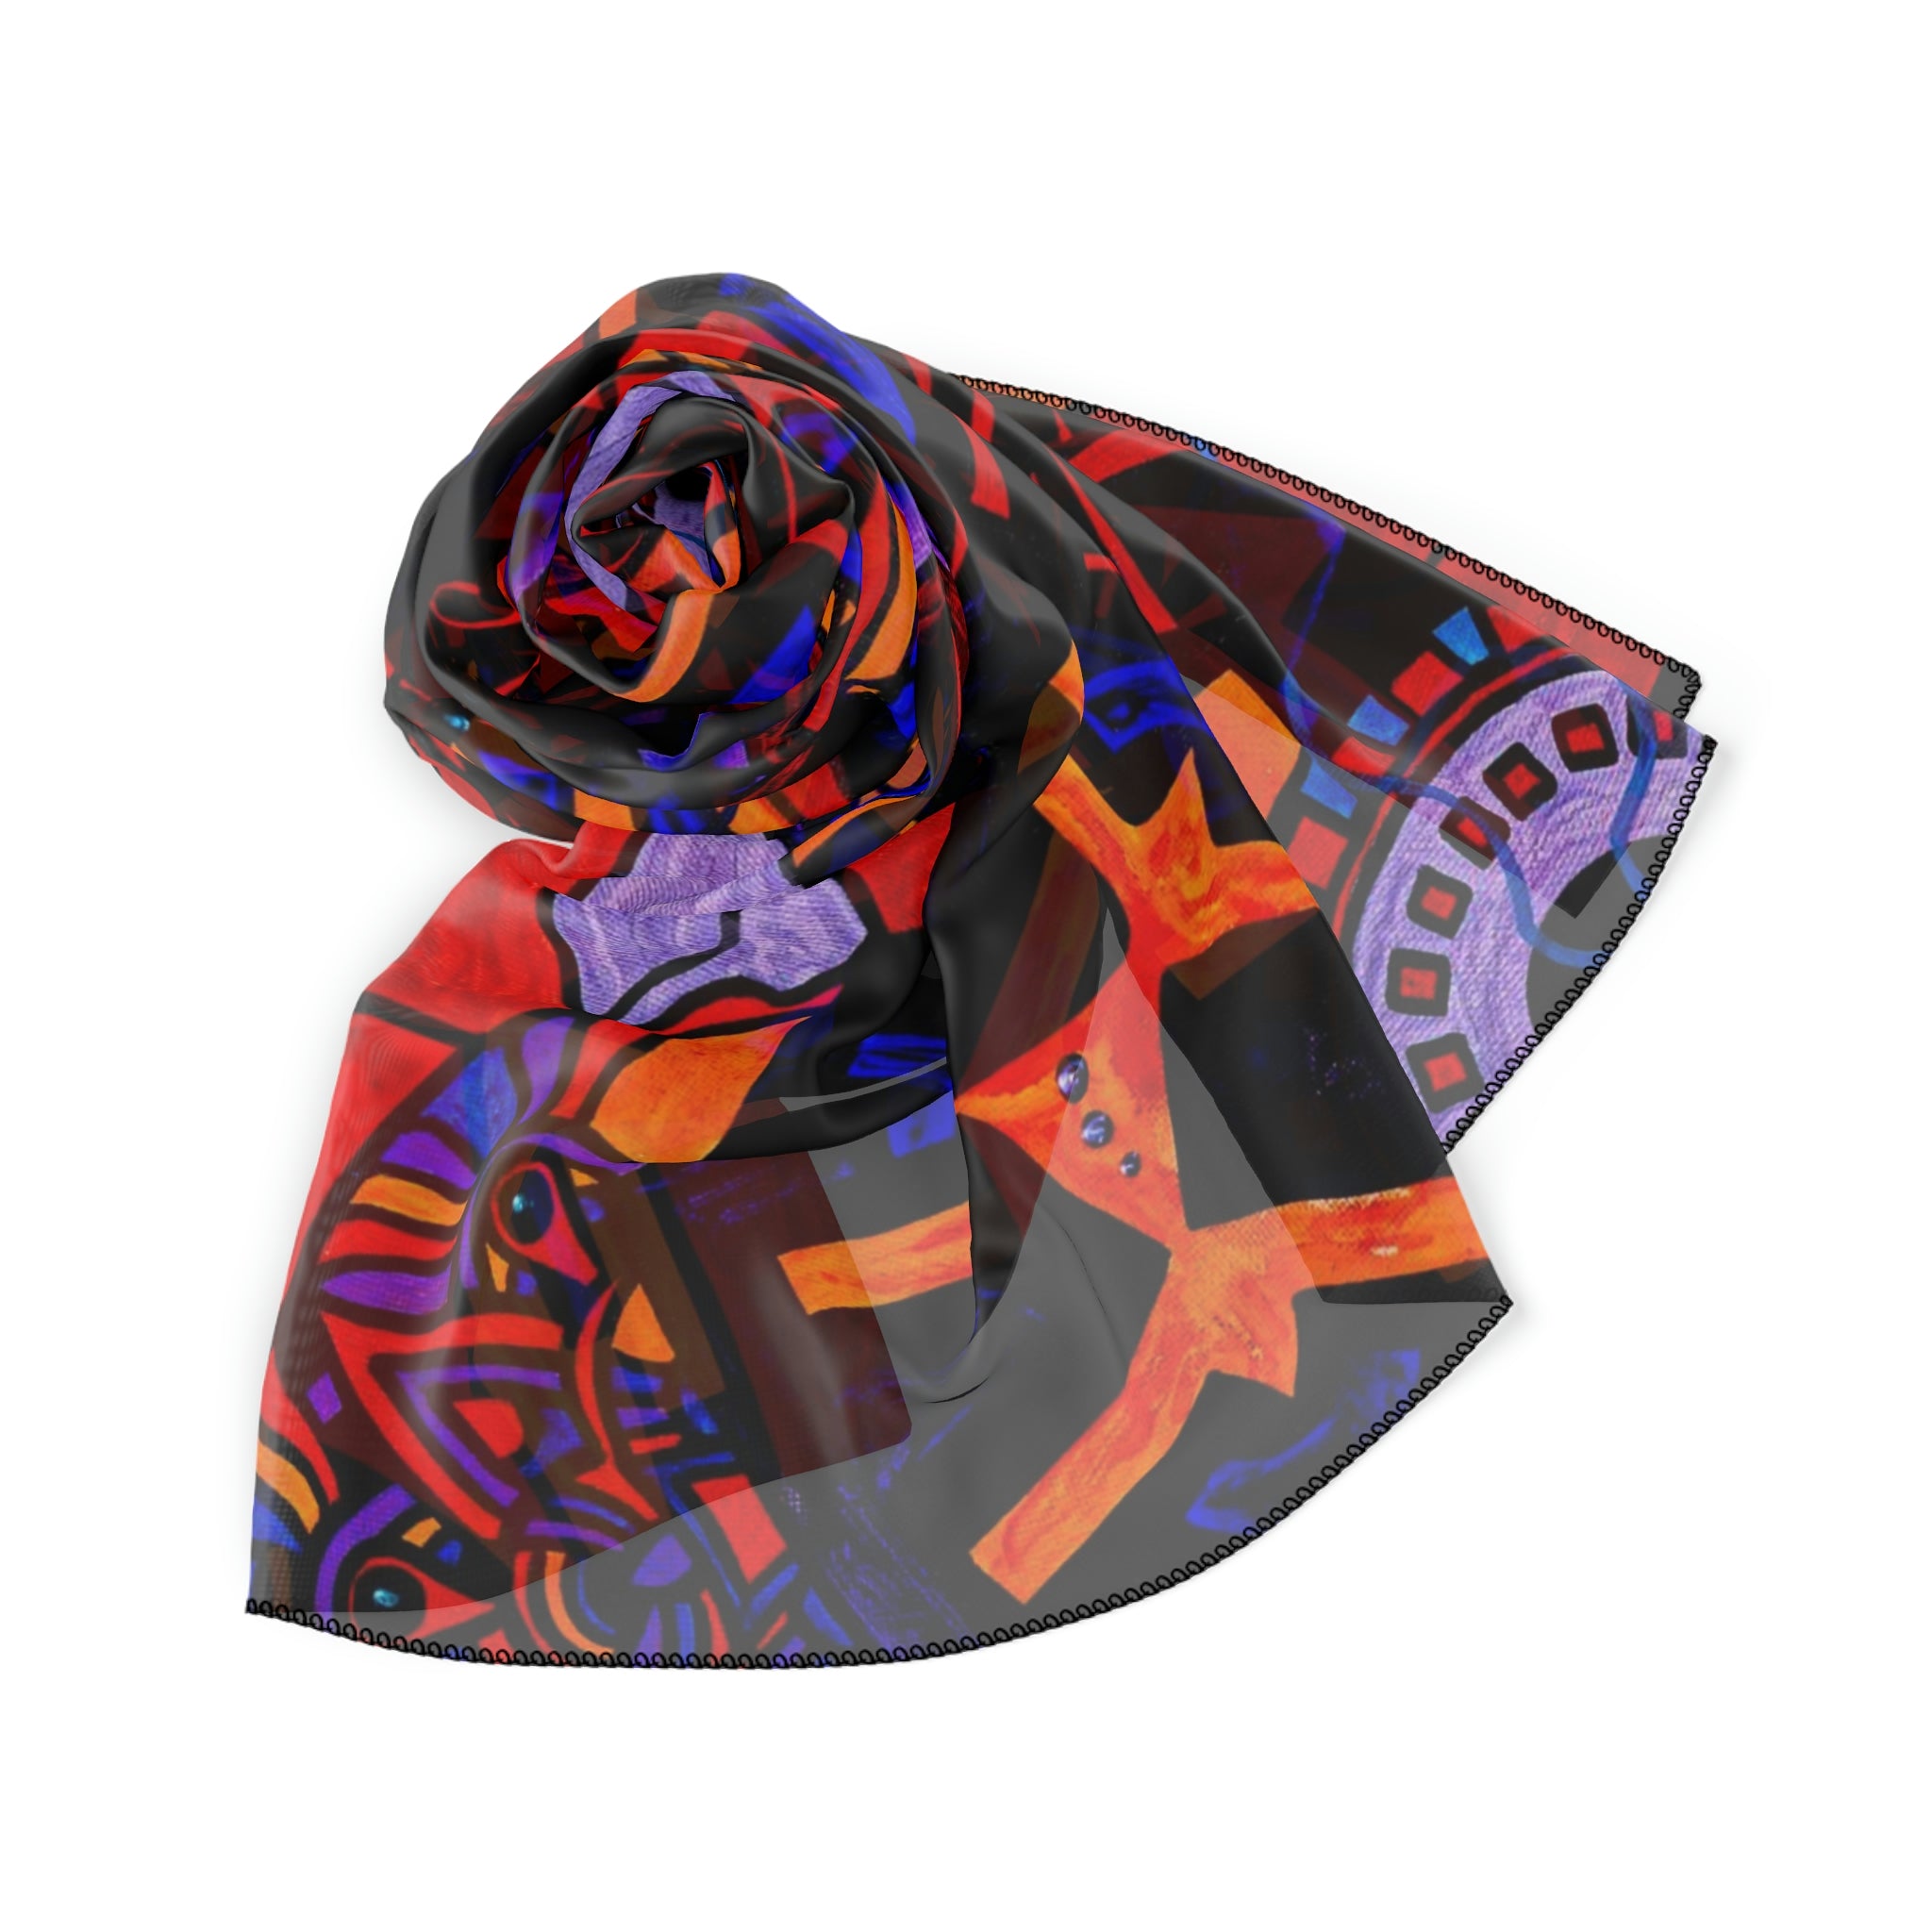 get-the-official-alnilam-strength-grid-frequency-scarf-online-sale_4.jpg